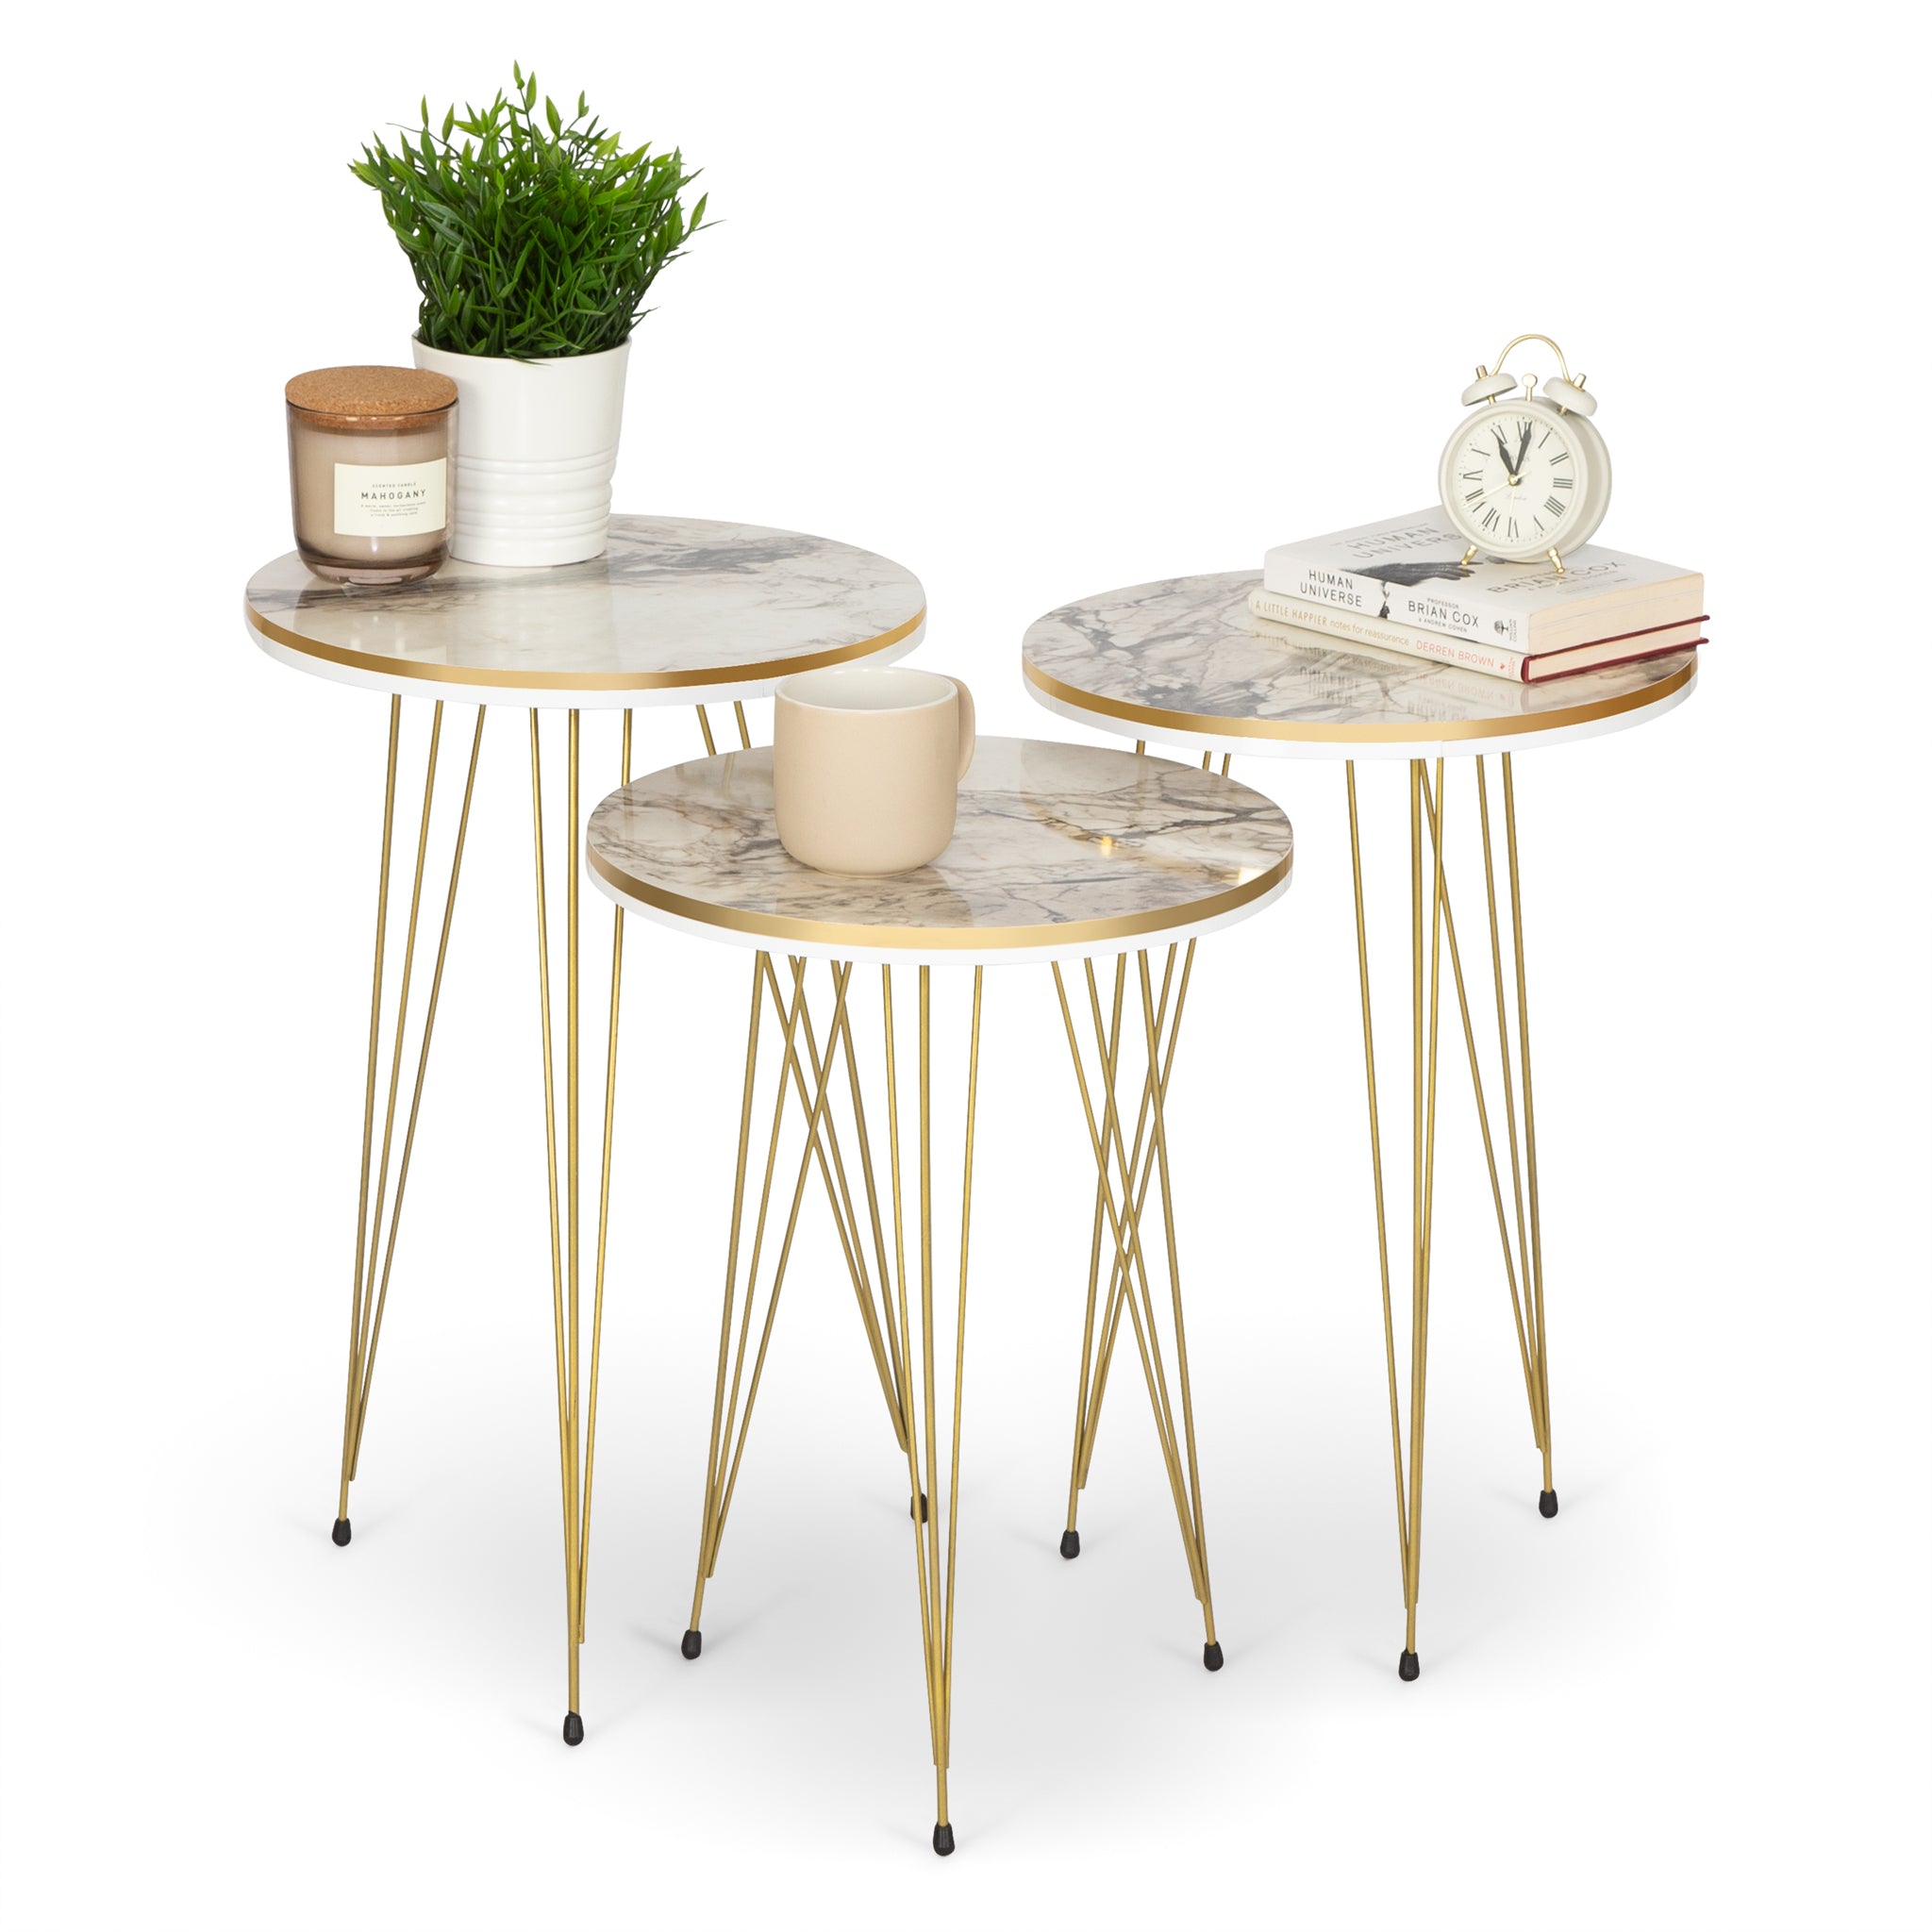 Ellipse Coffee Table & Set of 3 Side tables - Gold & White Marble